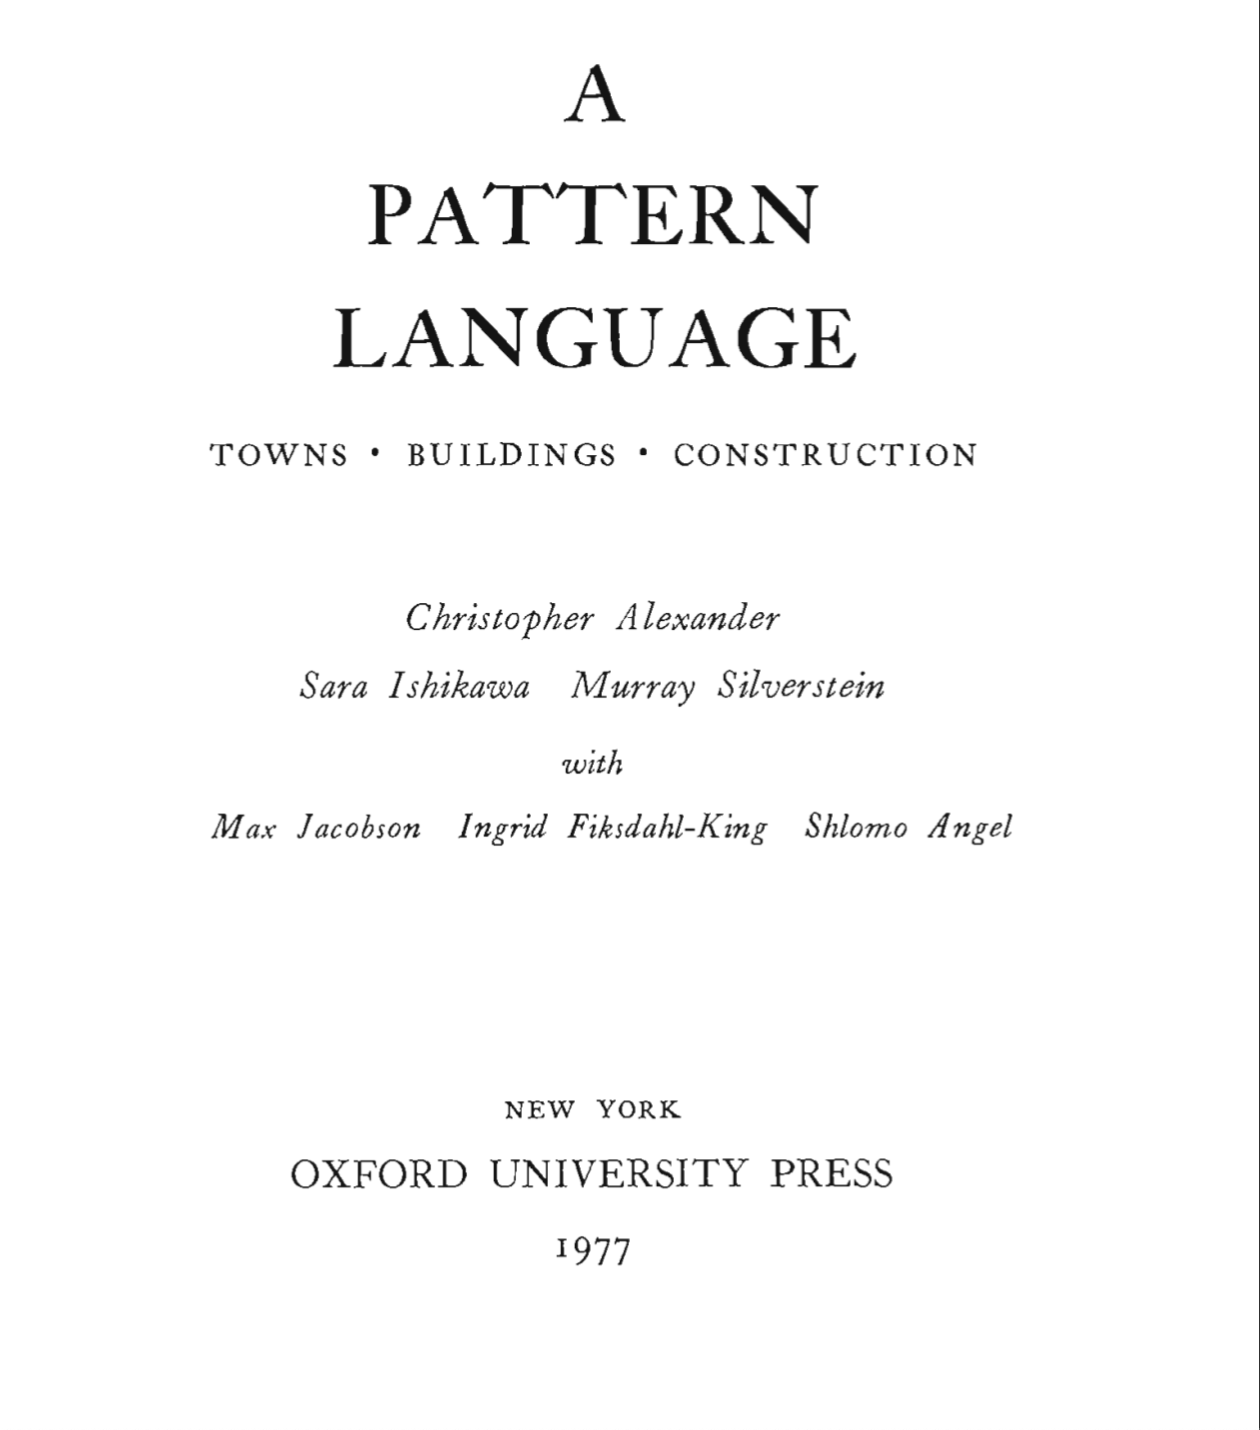 A Pattern Language Samples. (top/left) Title Page (middle 1) Contents (middle 2) Pattern 16: Web of Public Transportation is “Fed” by Prior Pattern 3: City Country Fingers and Pattern 11: Local Transport Areas (bottom/right) To “Delve Deeper” Into Achieving Pattern 16 Then See Pattern 20: Minibuses and Pattern 34: Interchanges